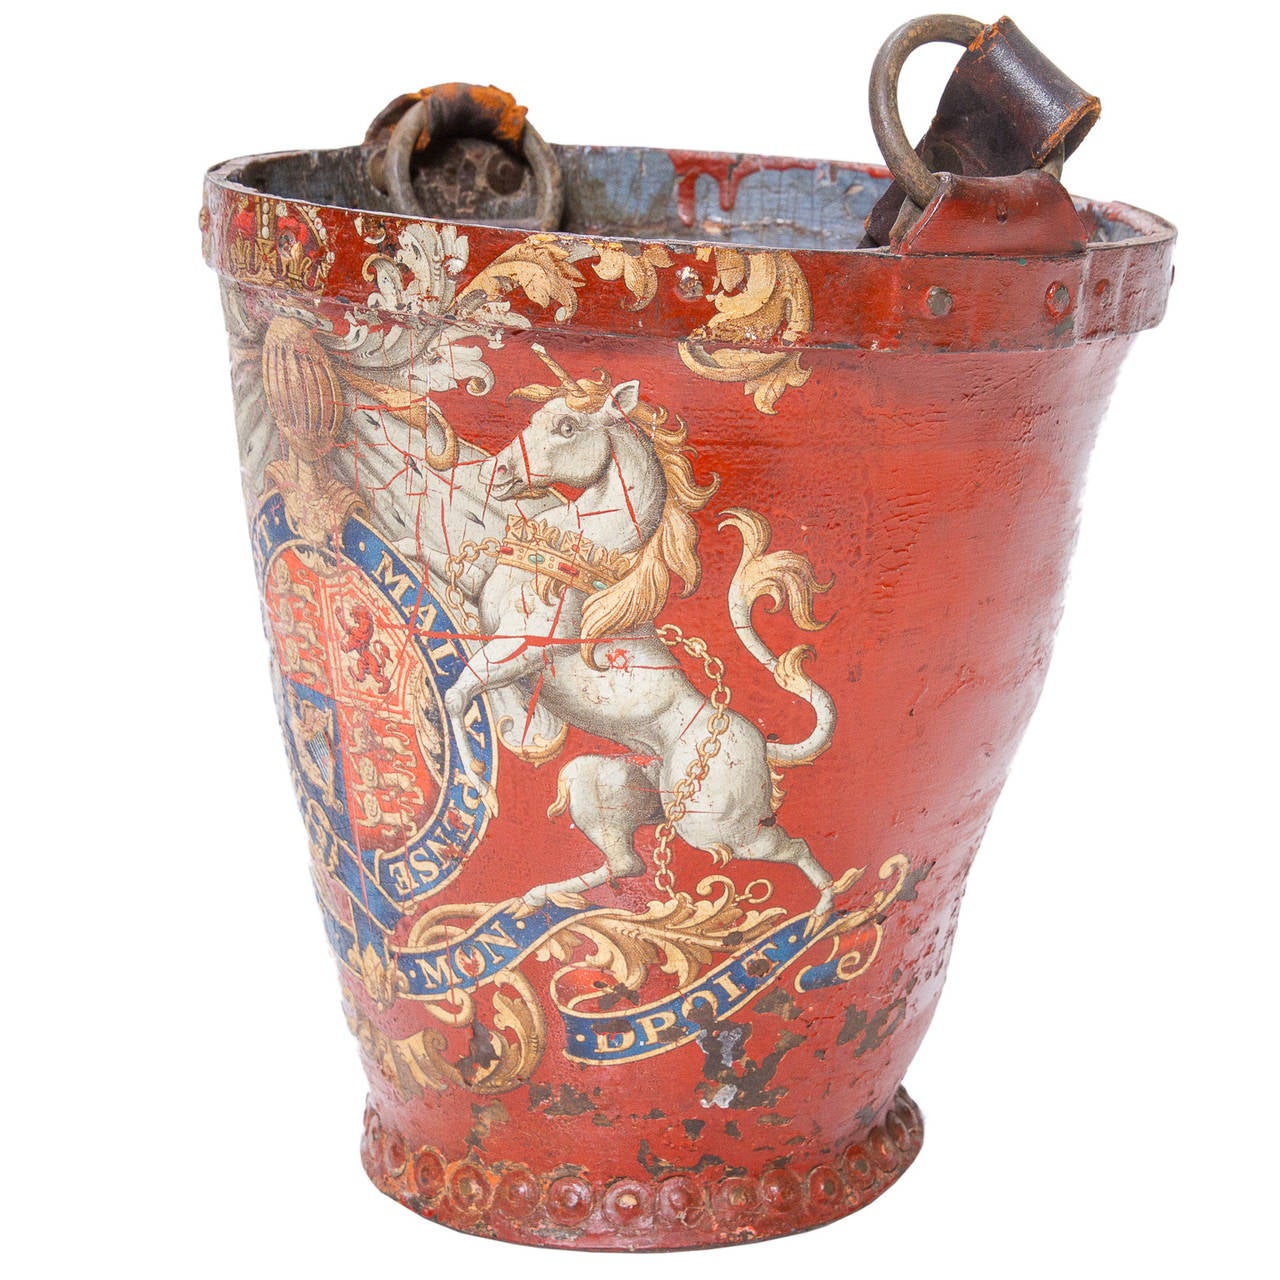 Victorian 19th Century English Fire Starter Bucket with a Coat of Arms